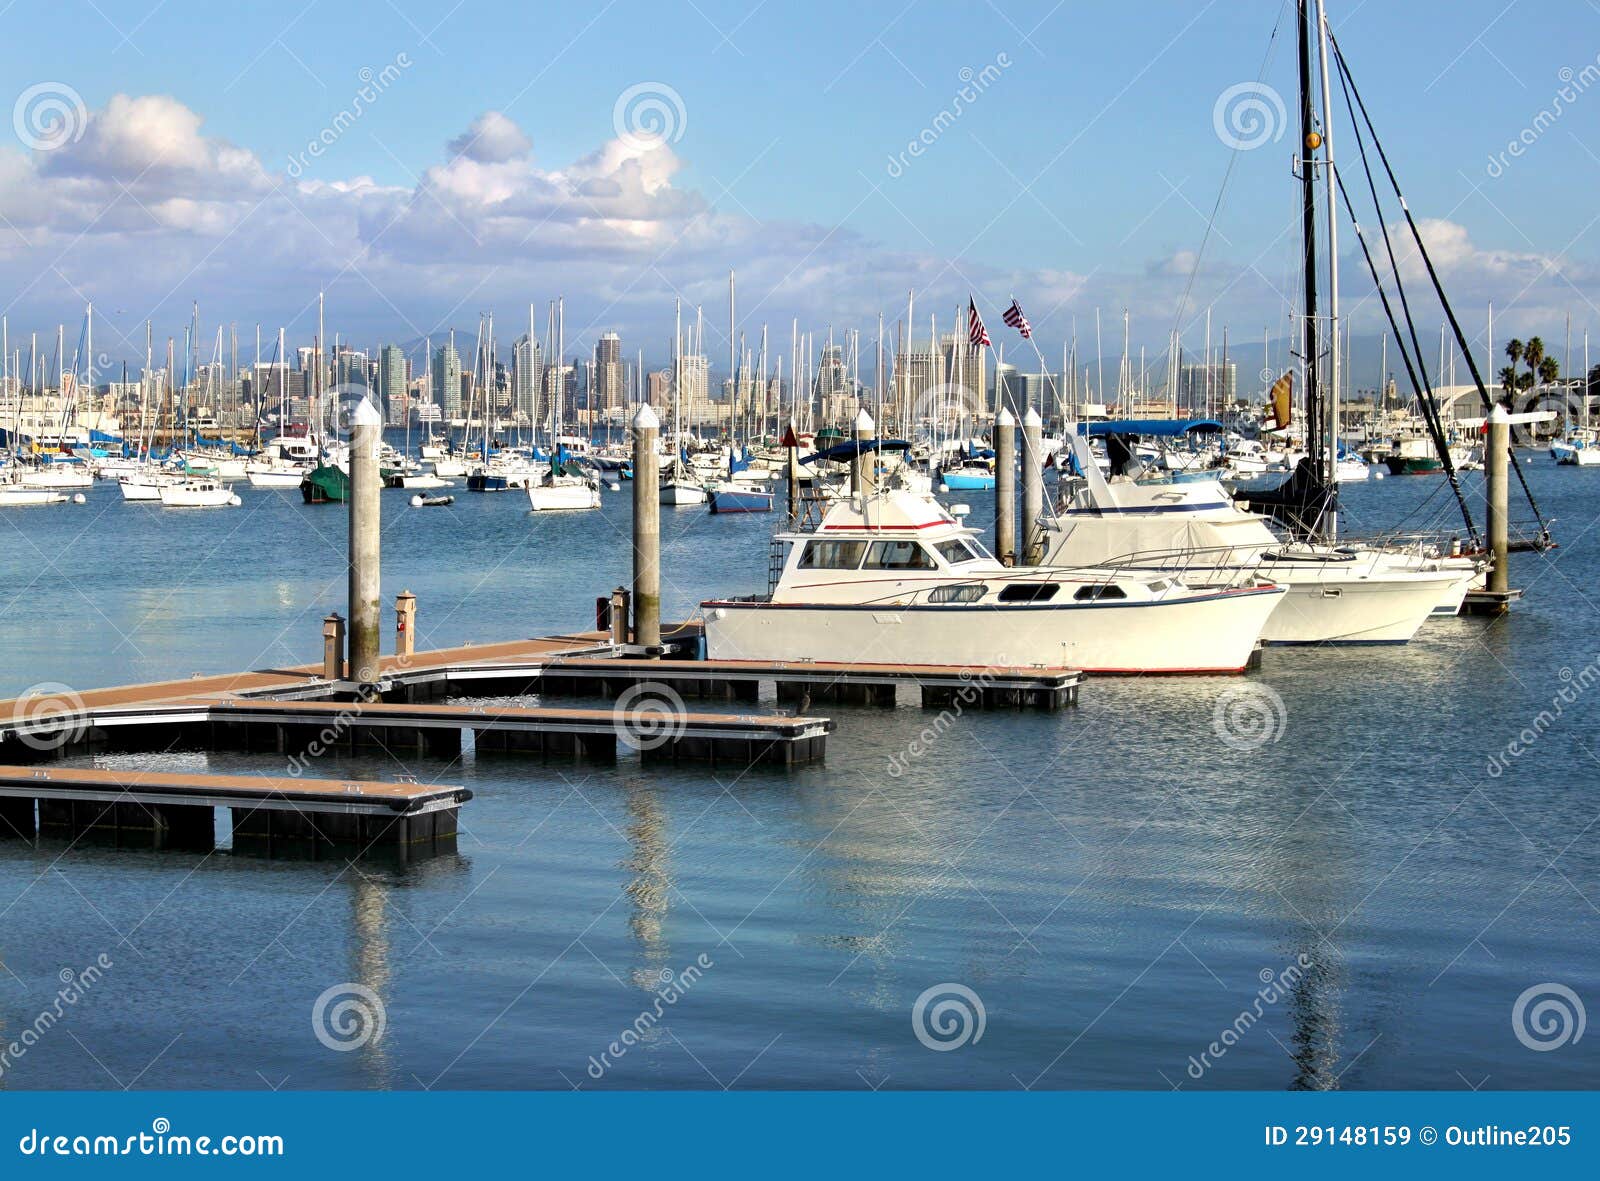 Dock at the bay stock image. Image of vessel, shore, california - 29148159